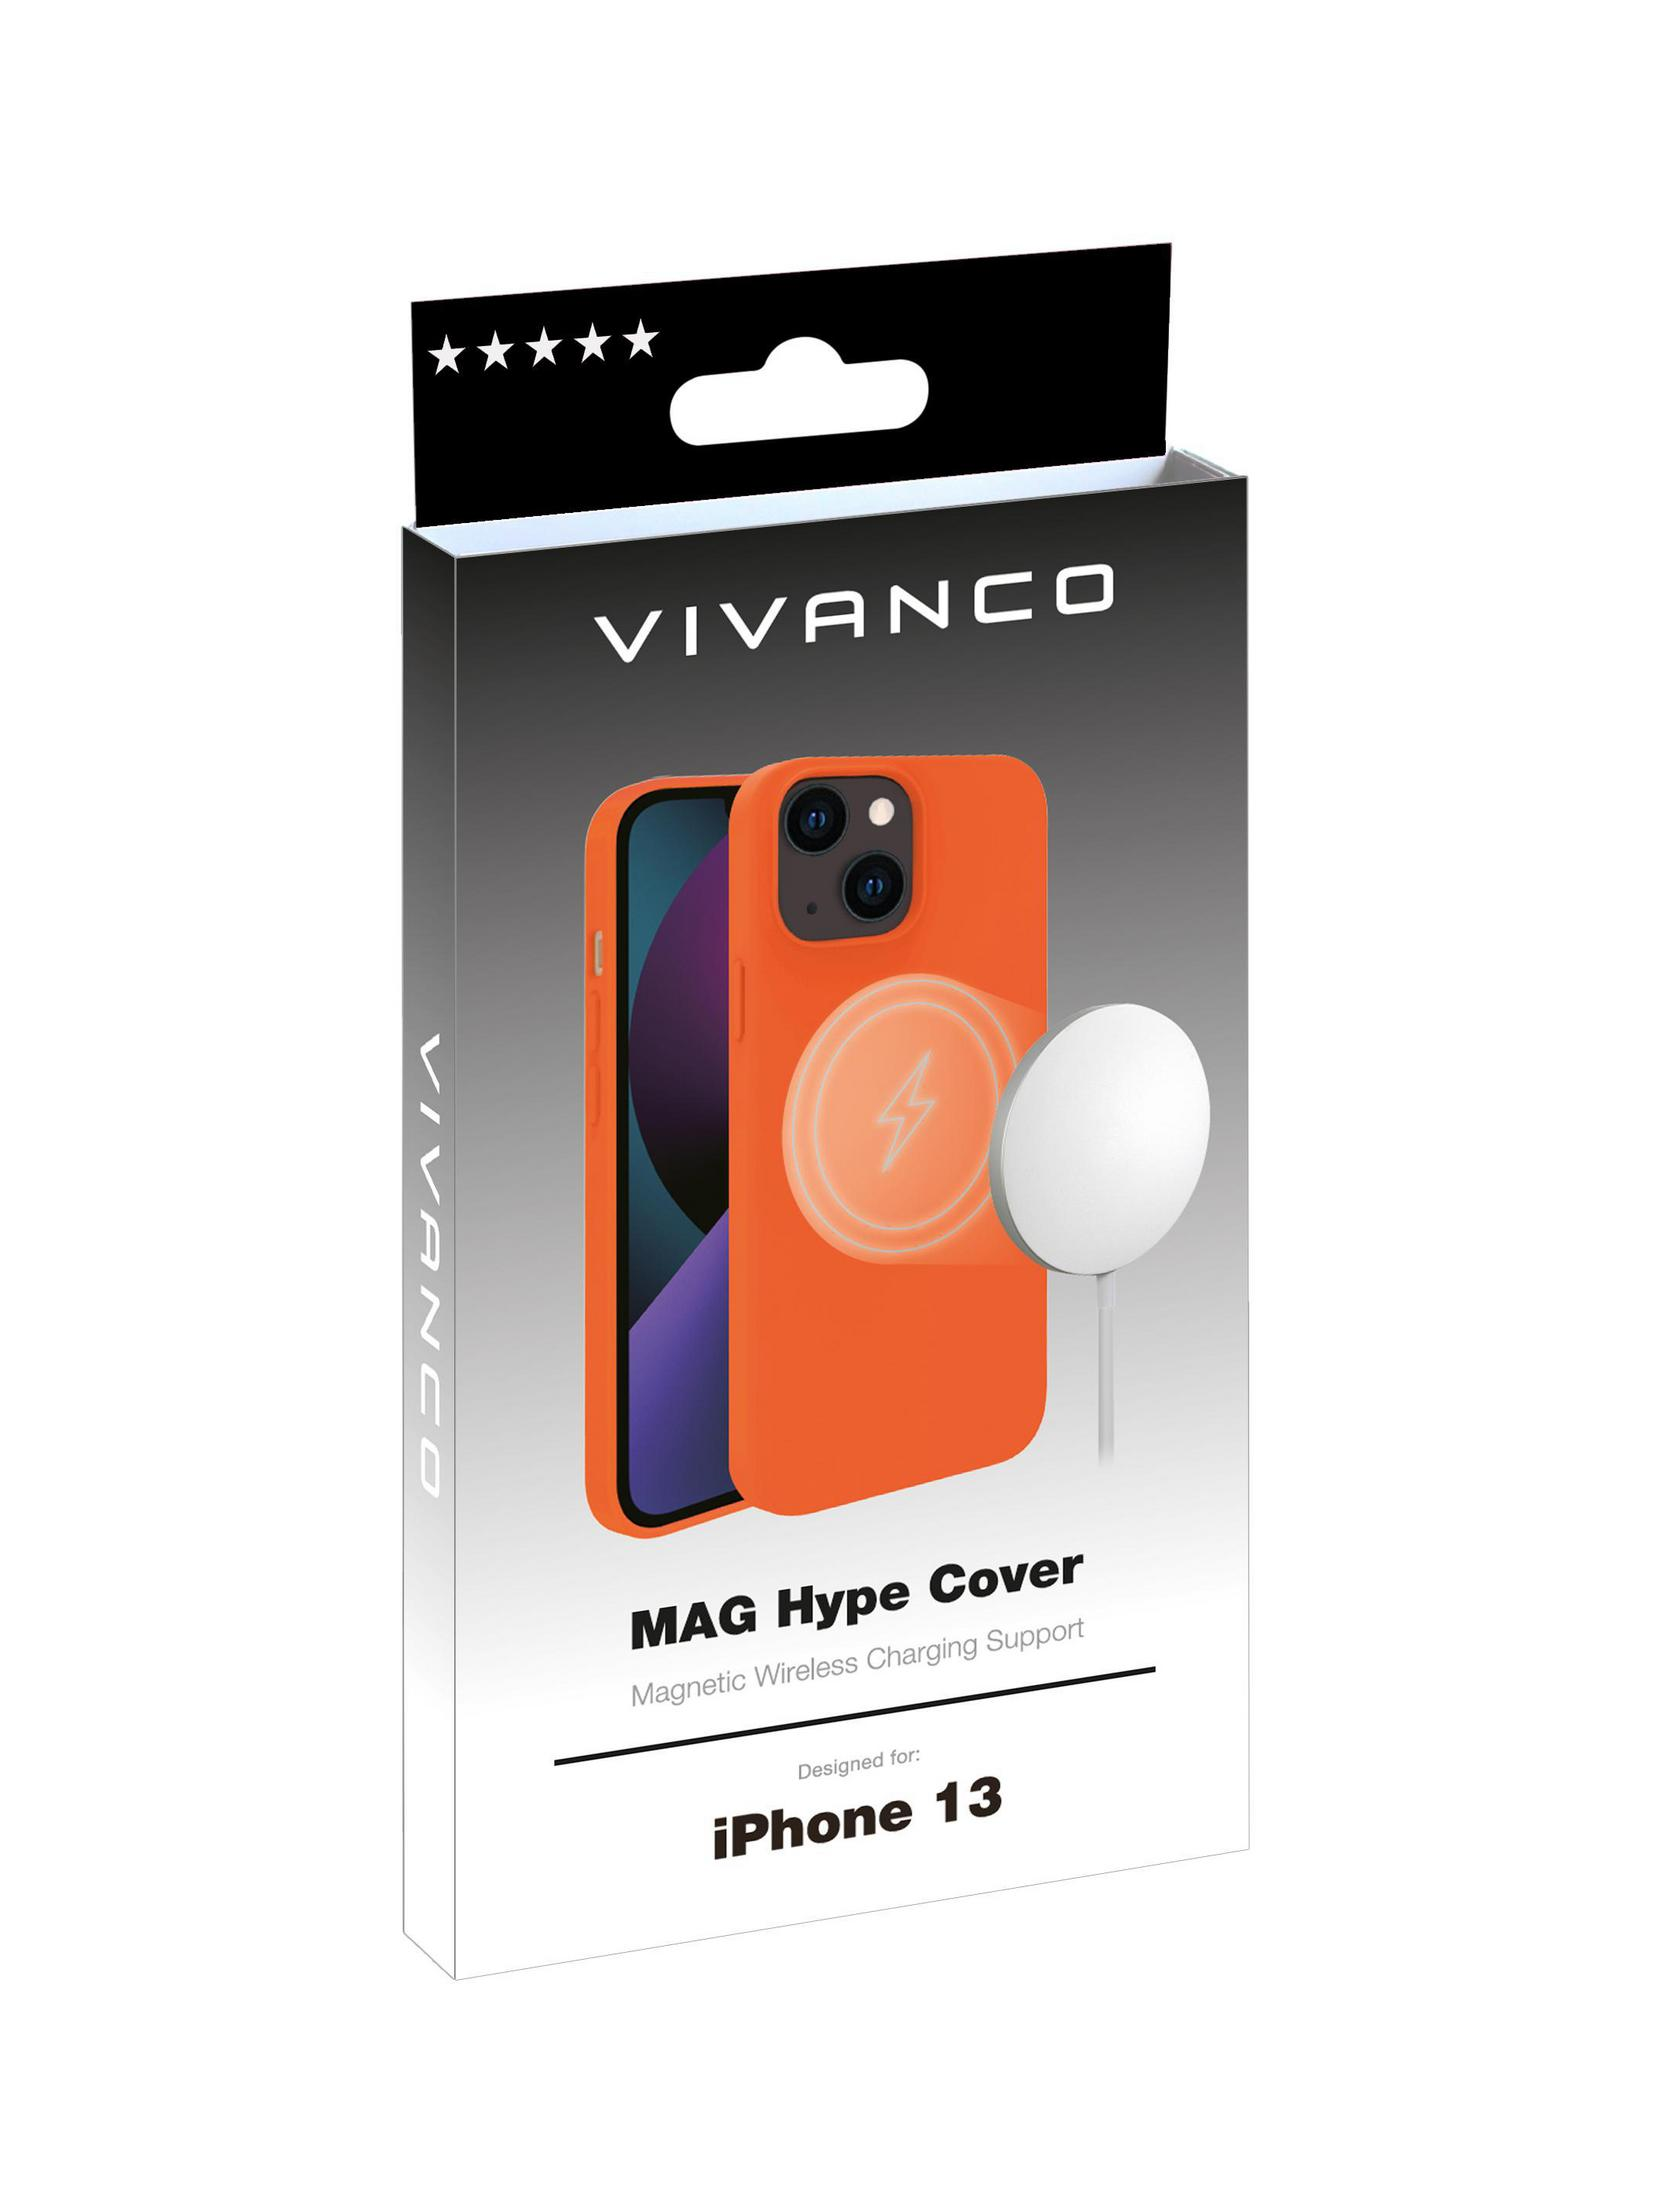 IPH13 Orange Apple, VIVANCO MAGHYPE 13, iPhone Backcover, OR, COVER 62946